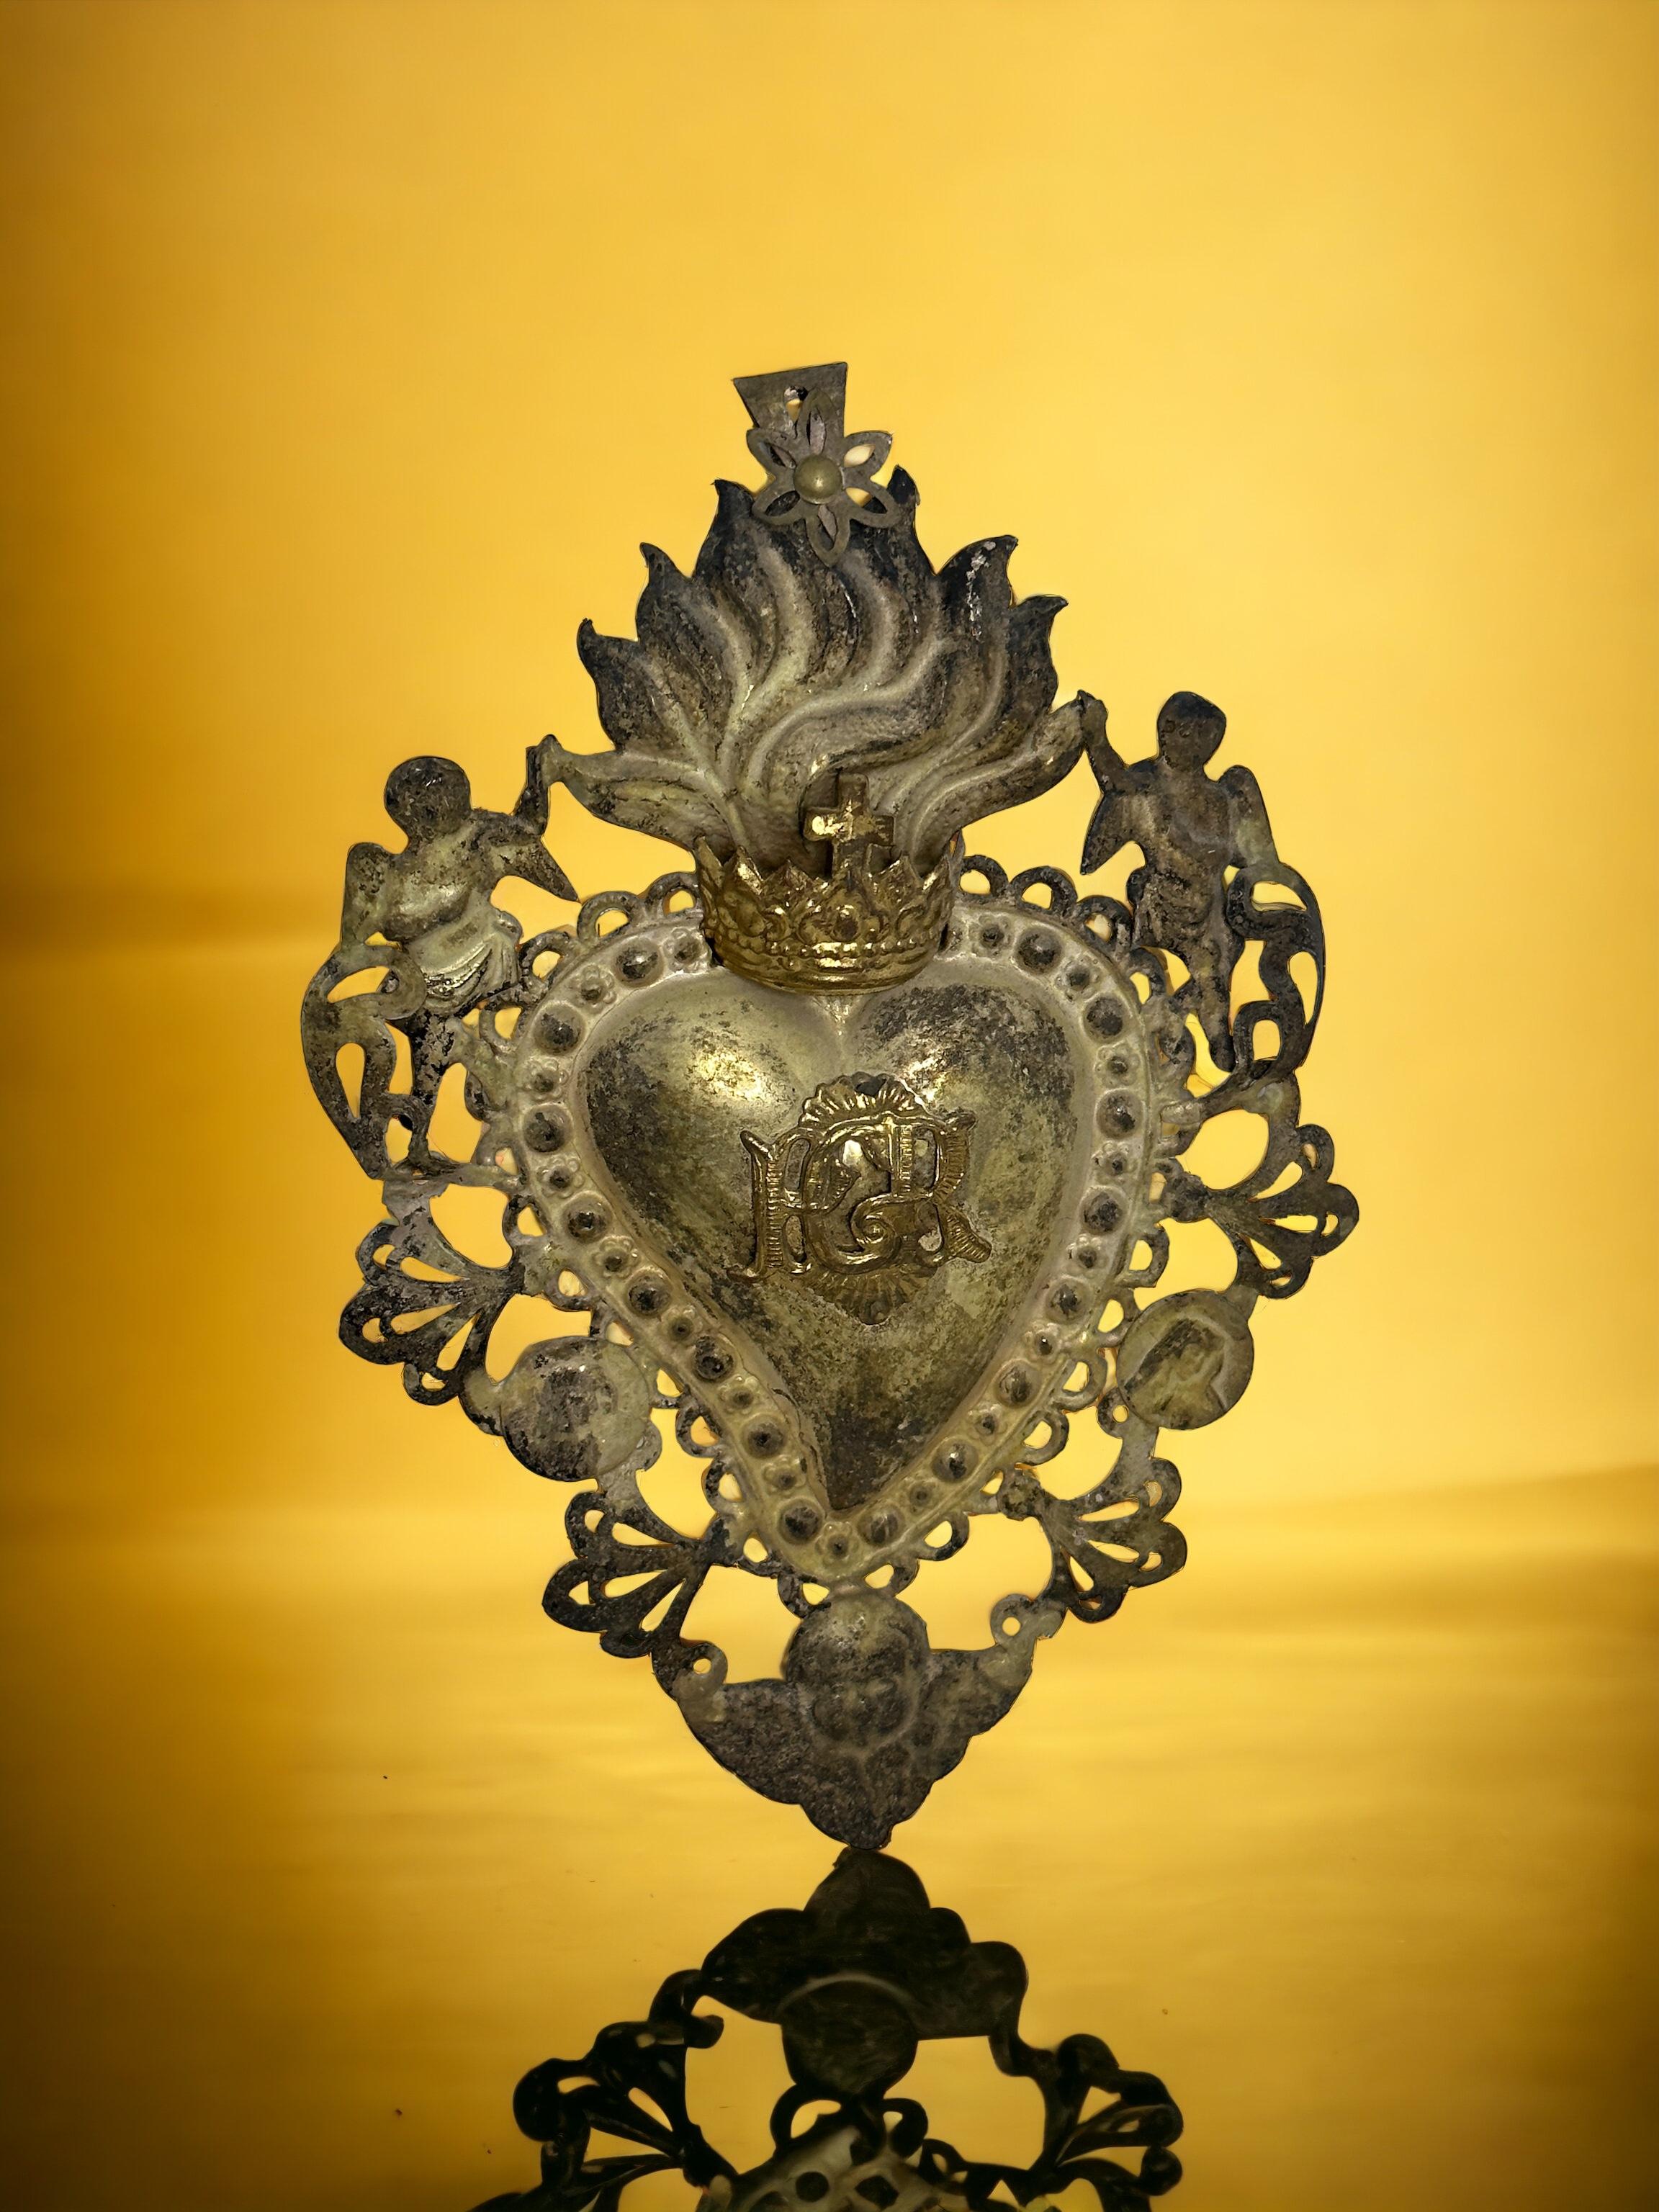 A cute petite religious Ex Voto. I do not know what it is made of, thin and light filigree silver or silver plated metal. It is handmade, embossed and then welded. Given the delicacy, I did not try to remove the tarnish and I think it gives the